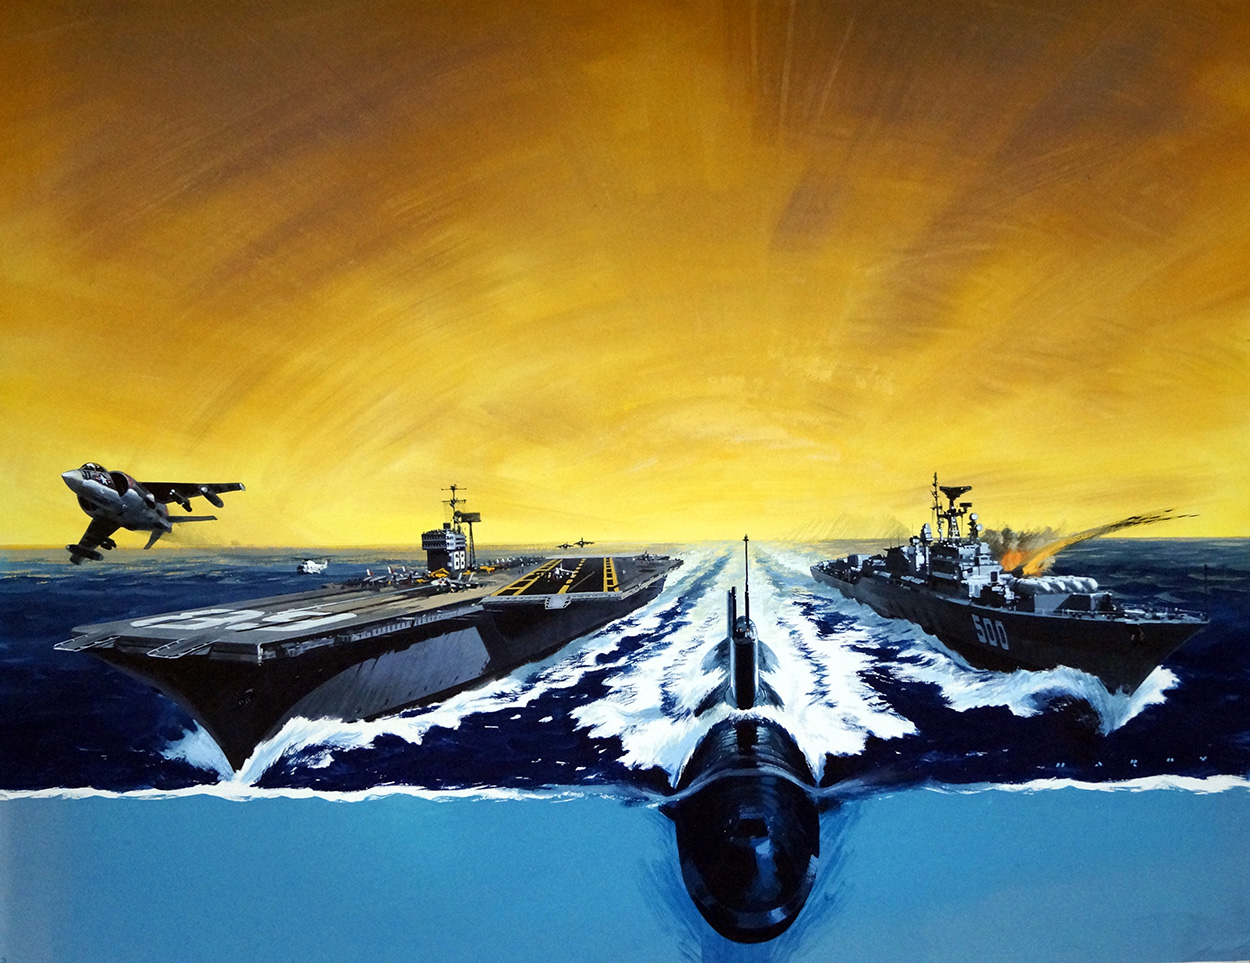 Defence at Sea (Original) (Signed) art by Sea (Wilf Hardy) at The Illustration Art Gallery